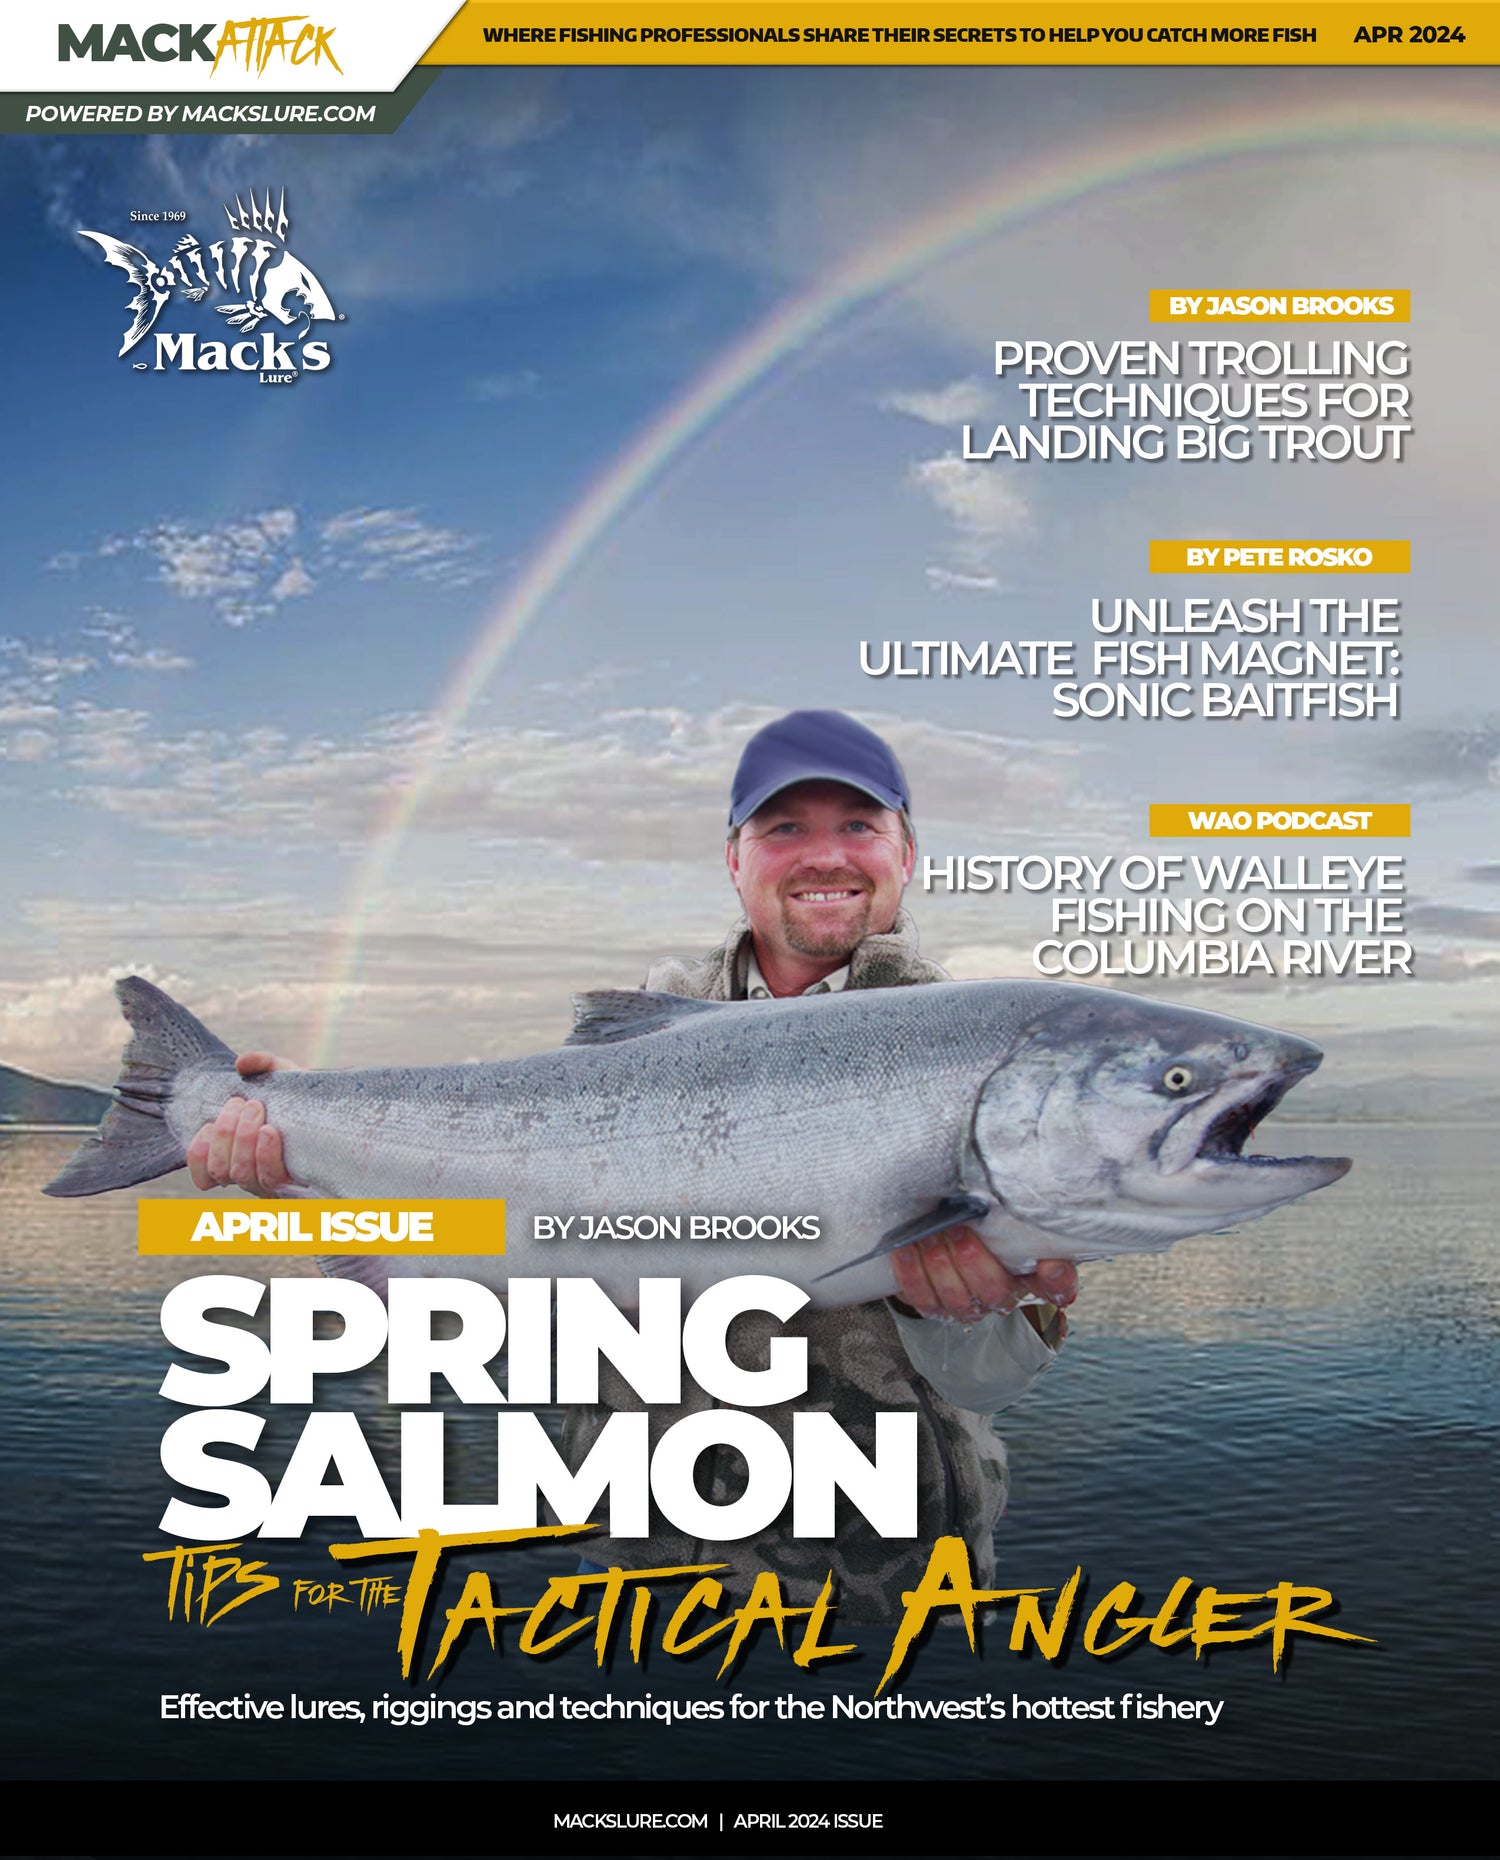 Spring Salmon Tips for the Tactical Angler